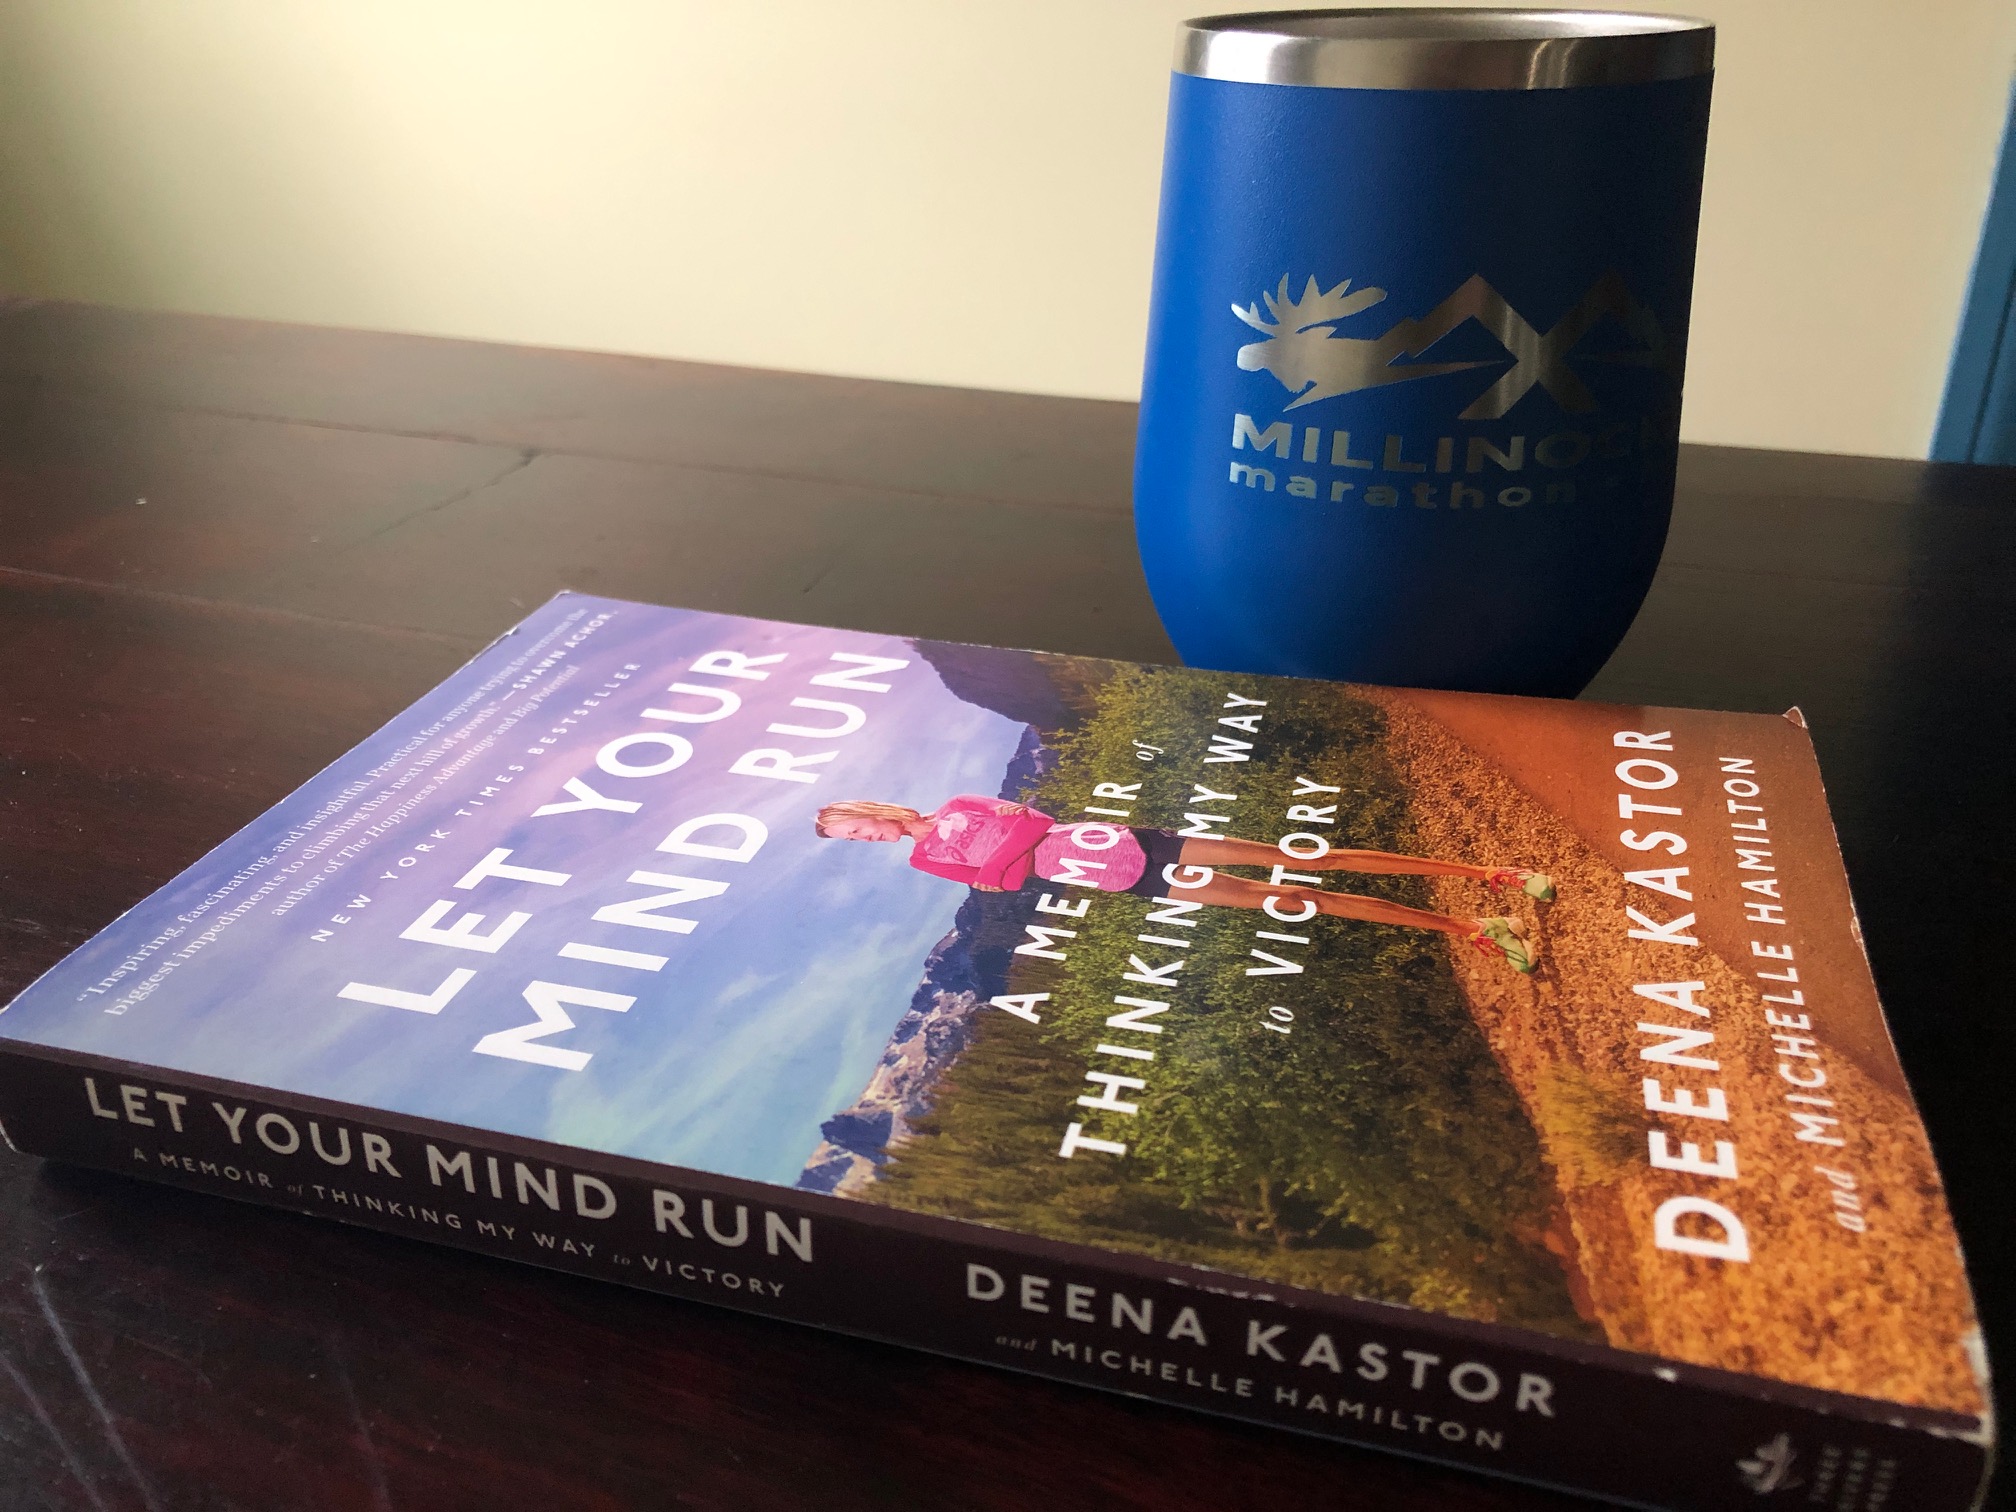 Enjoy a tea with this one! Deena Kastor herself would want you to!